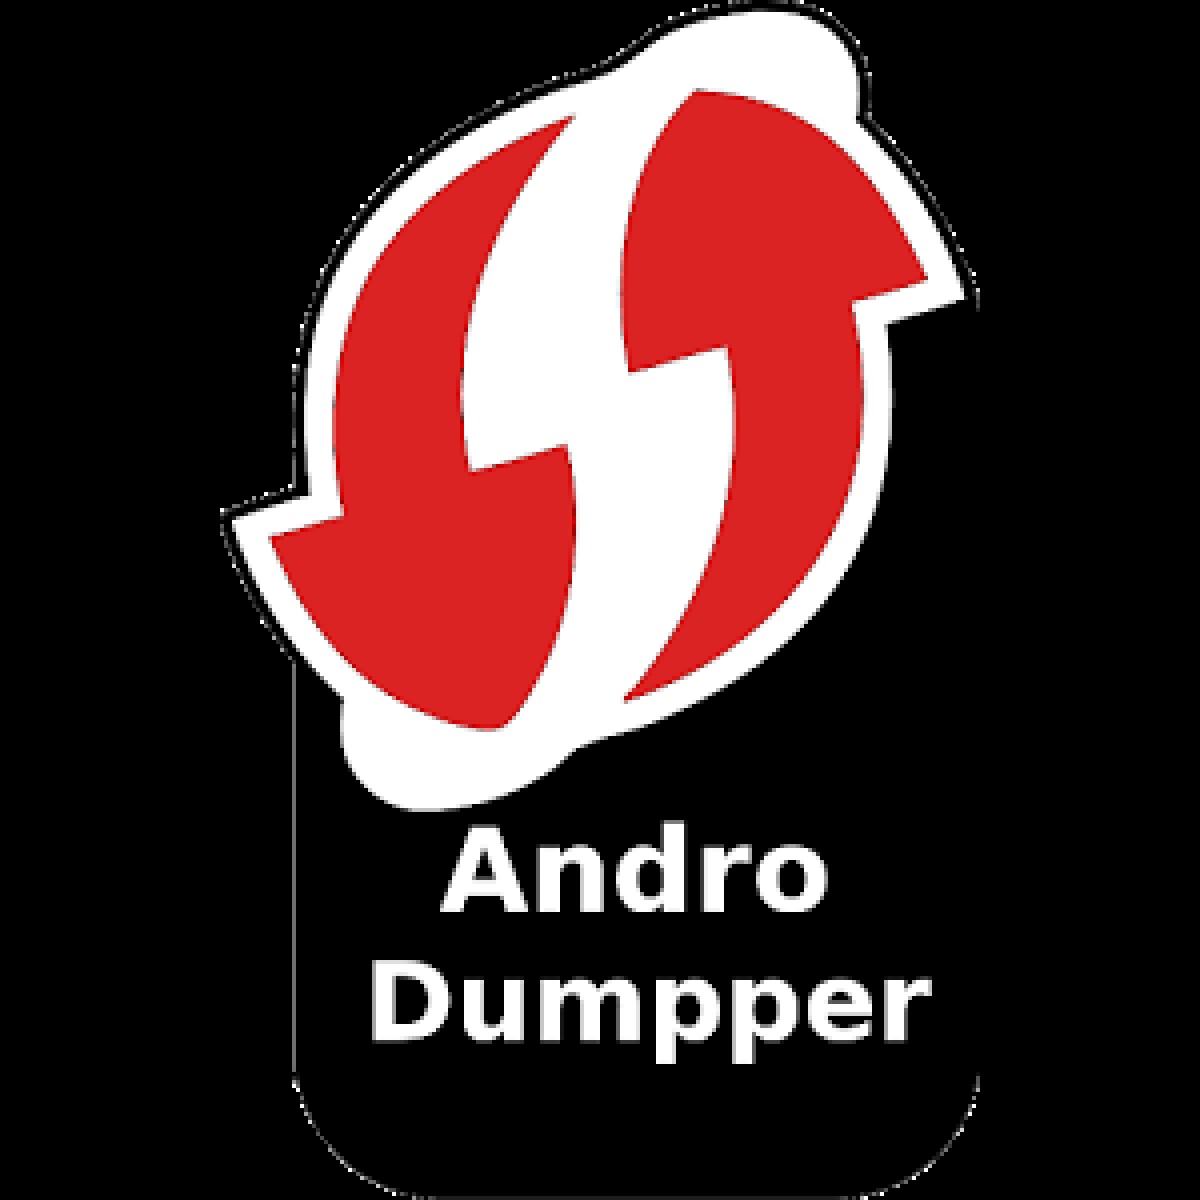 AndroDumpper Wifi For PC Windows (7, 8, 10, Xp) Free Download